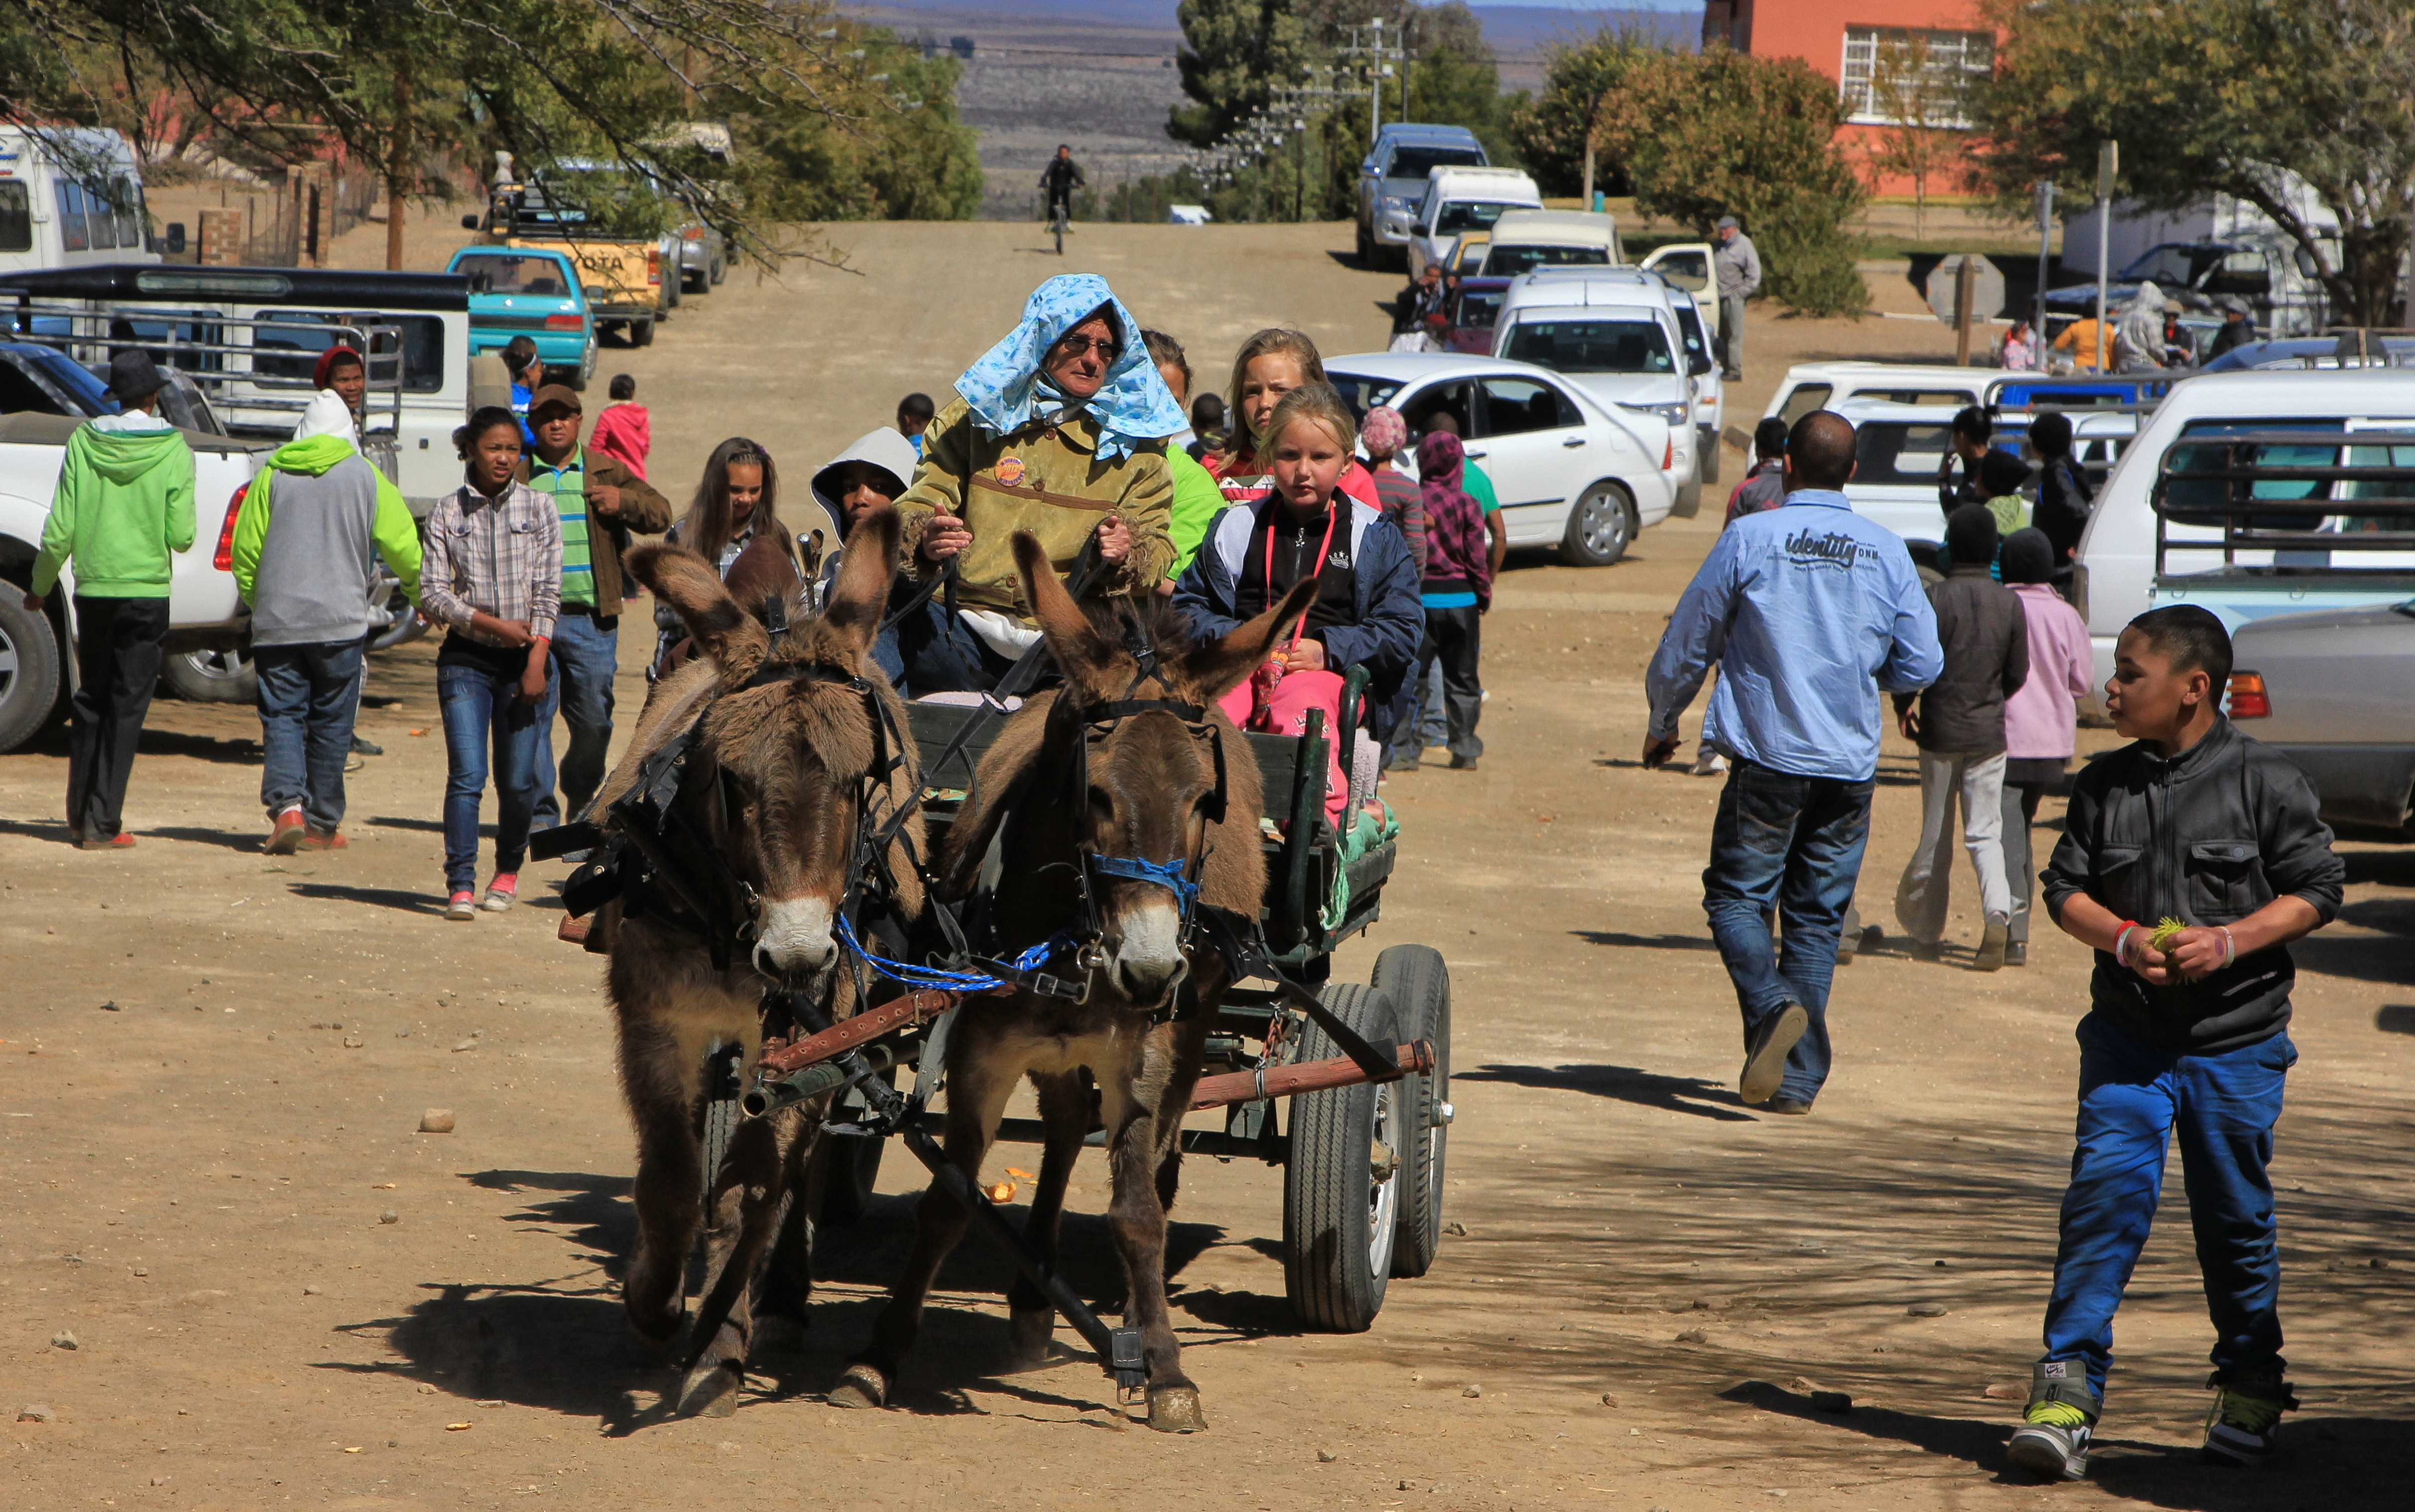 Magrieta Botha and her donkeys were always a feature of the festival. Image: Chris Marais